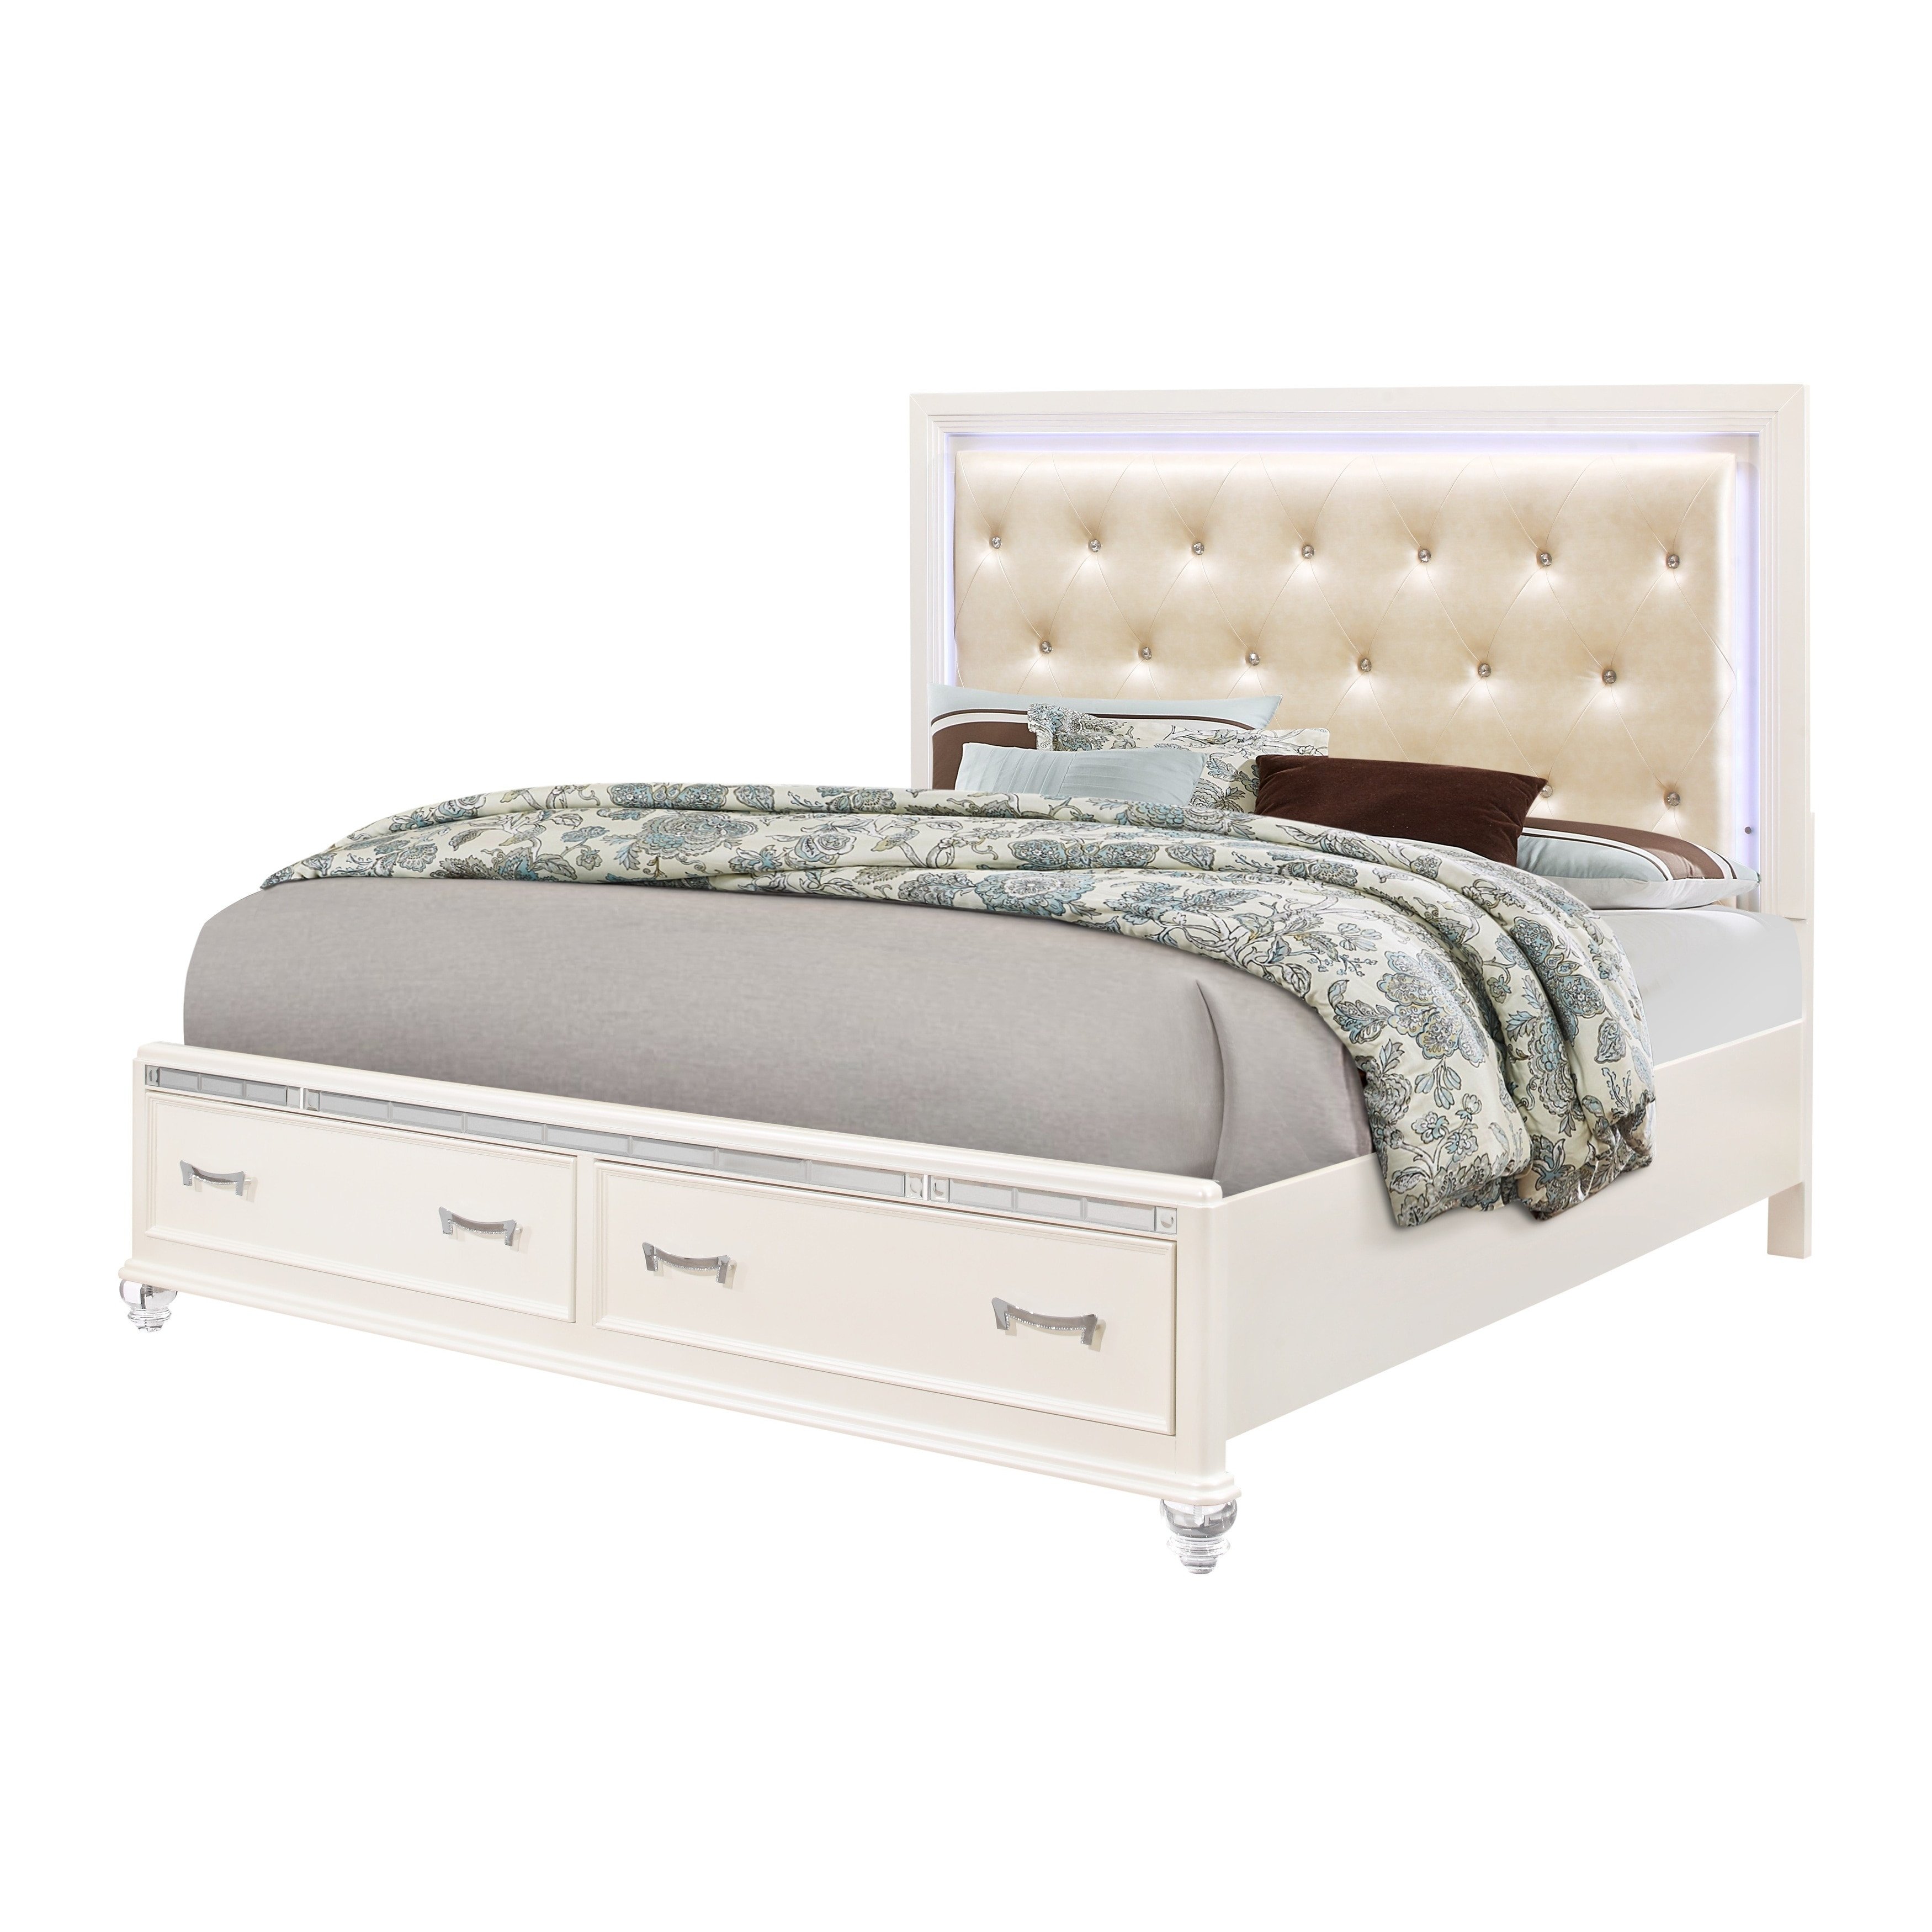 Bedroom Set with Mattress Included Unique Global Furniture Usa sofia White Queen Bed